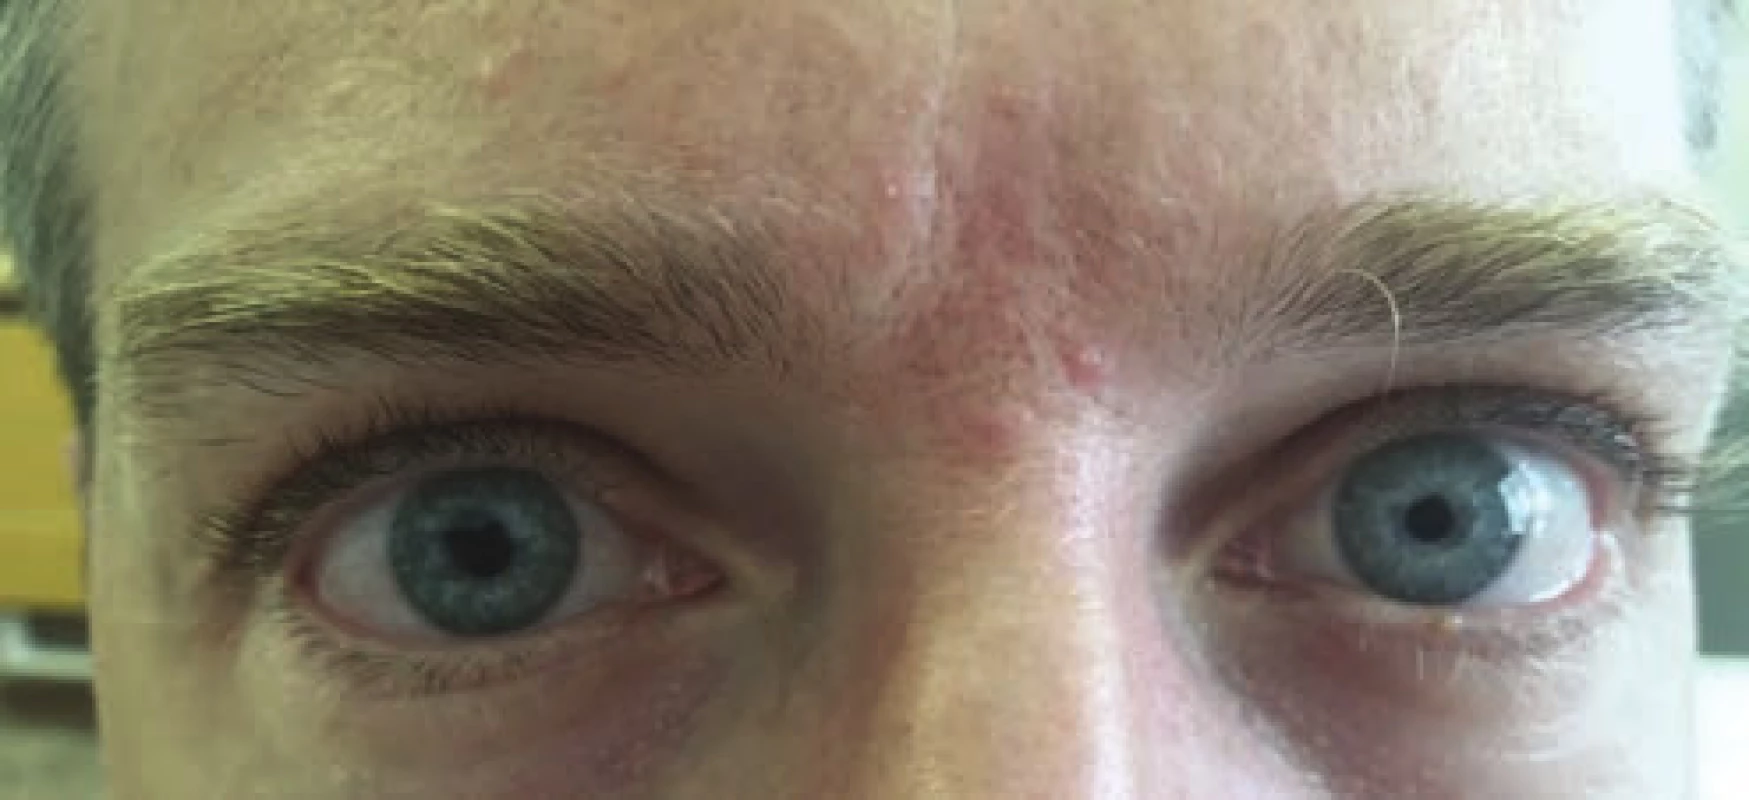 Patient with anisocoria in right eye